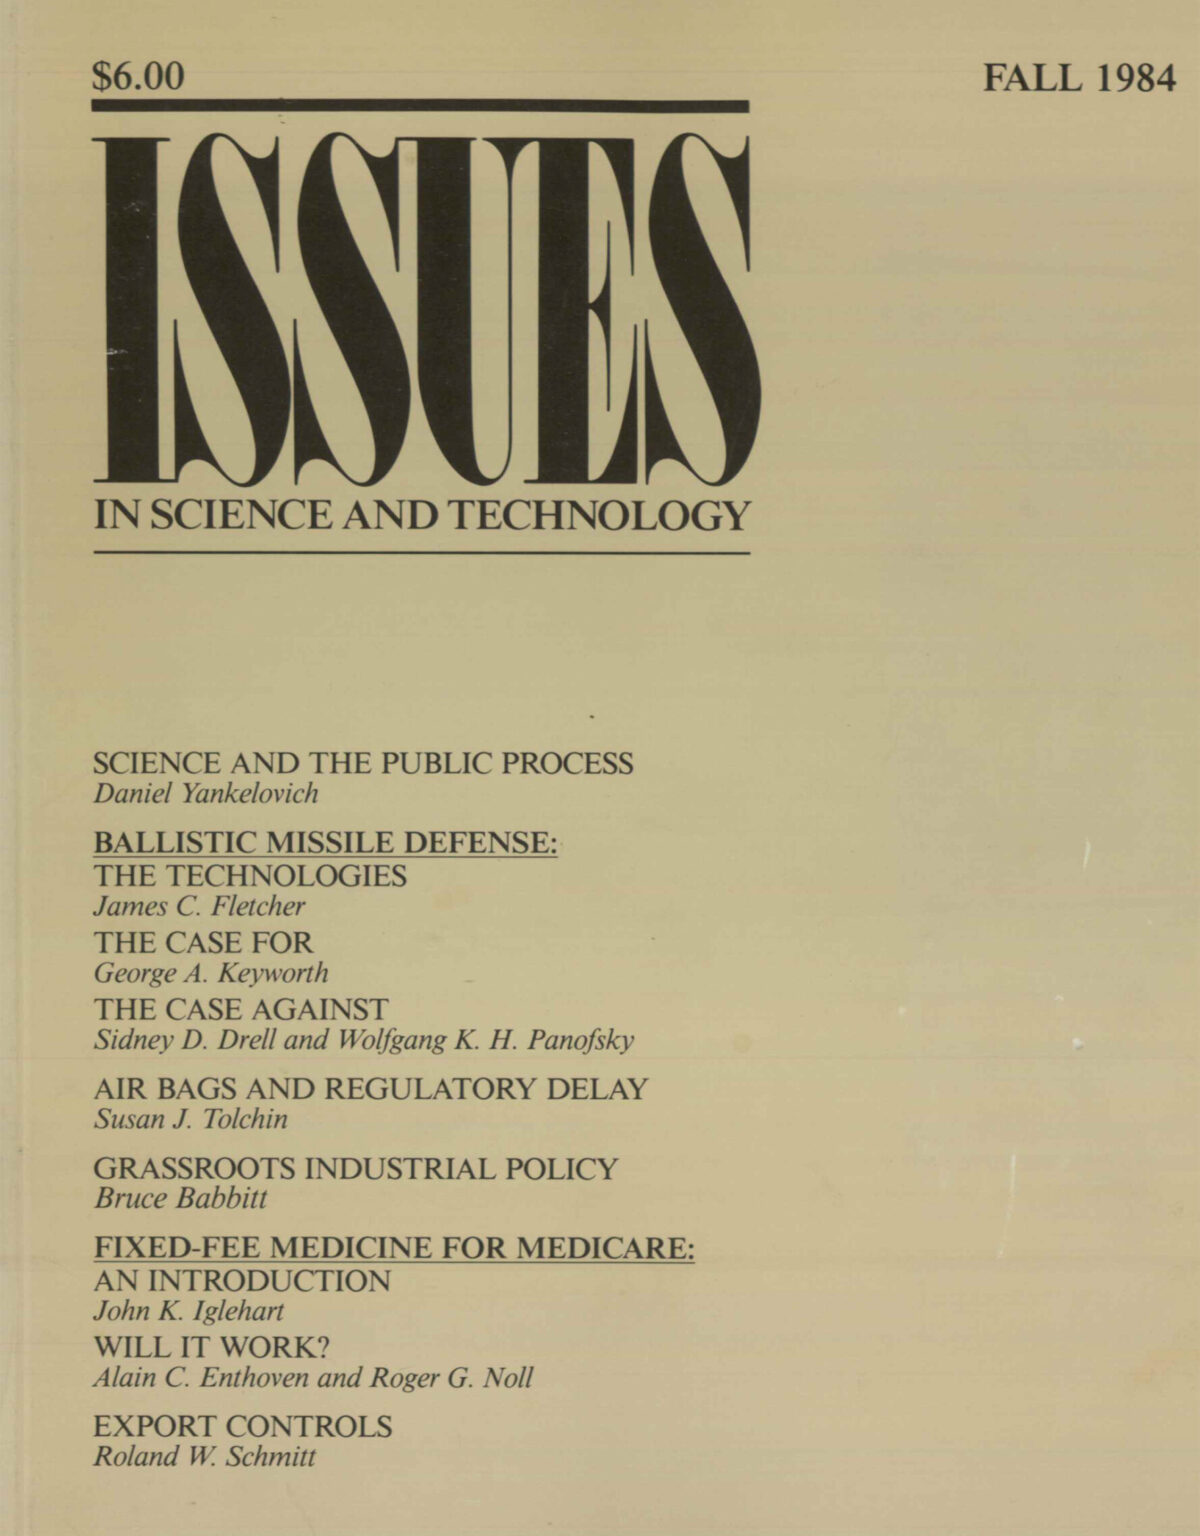 Cover of the Fall 1984 Issues in Science and Technology